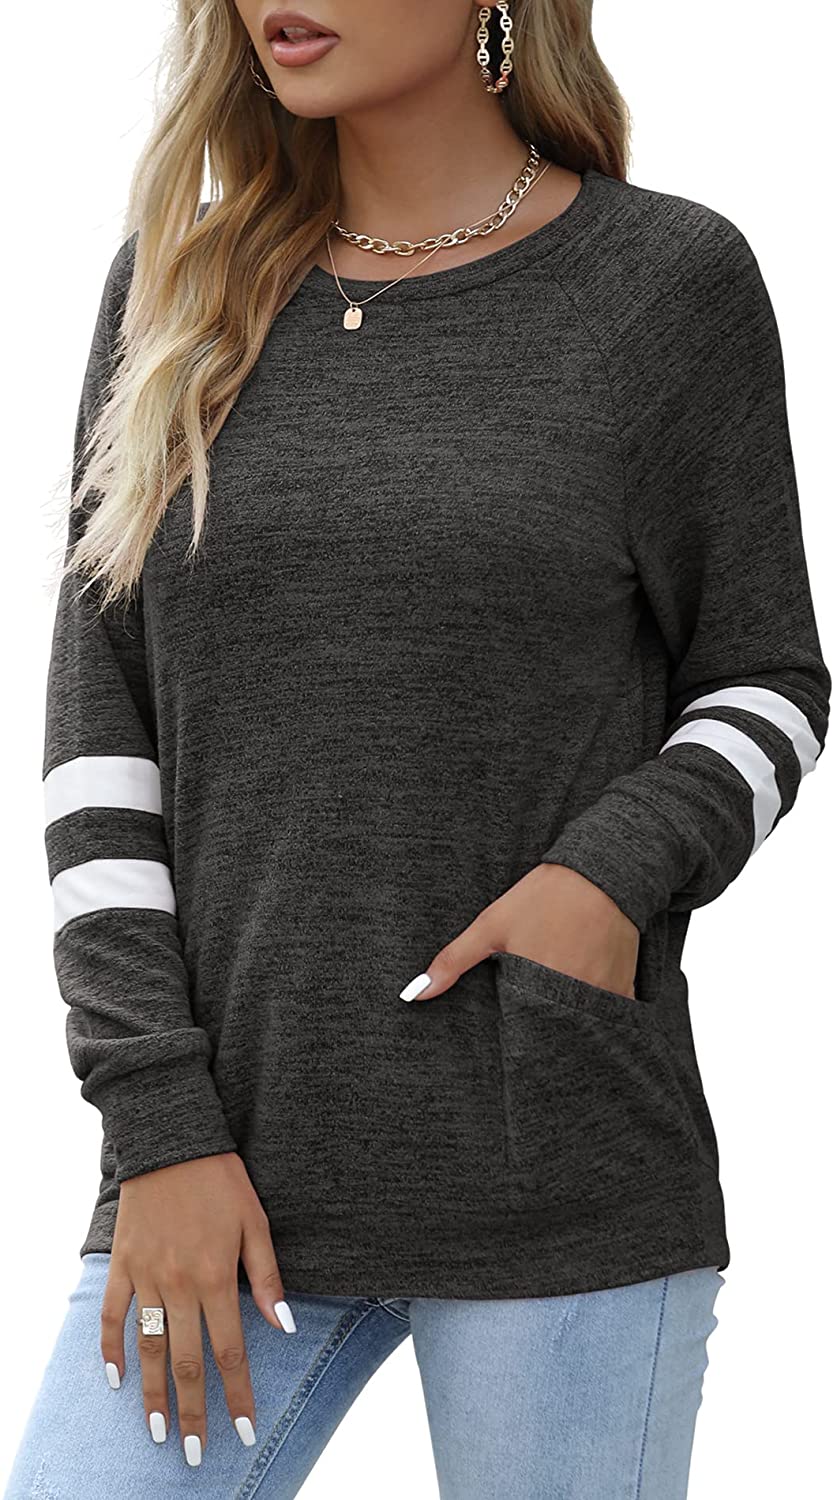 thumbnail 5  - LILBETTER Womens Casual Color Block Long Sleeve Round Neck Pocket T Shirts Blous